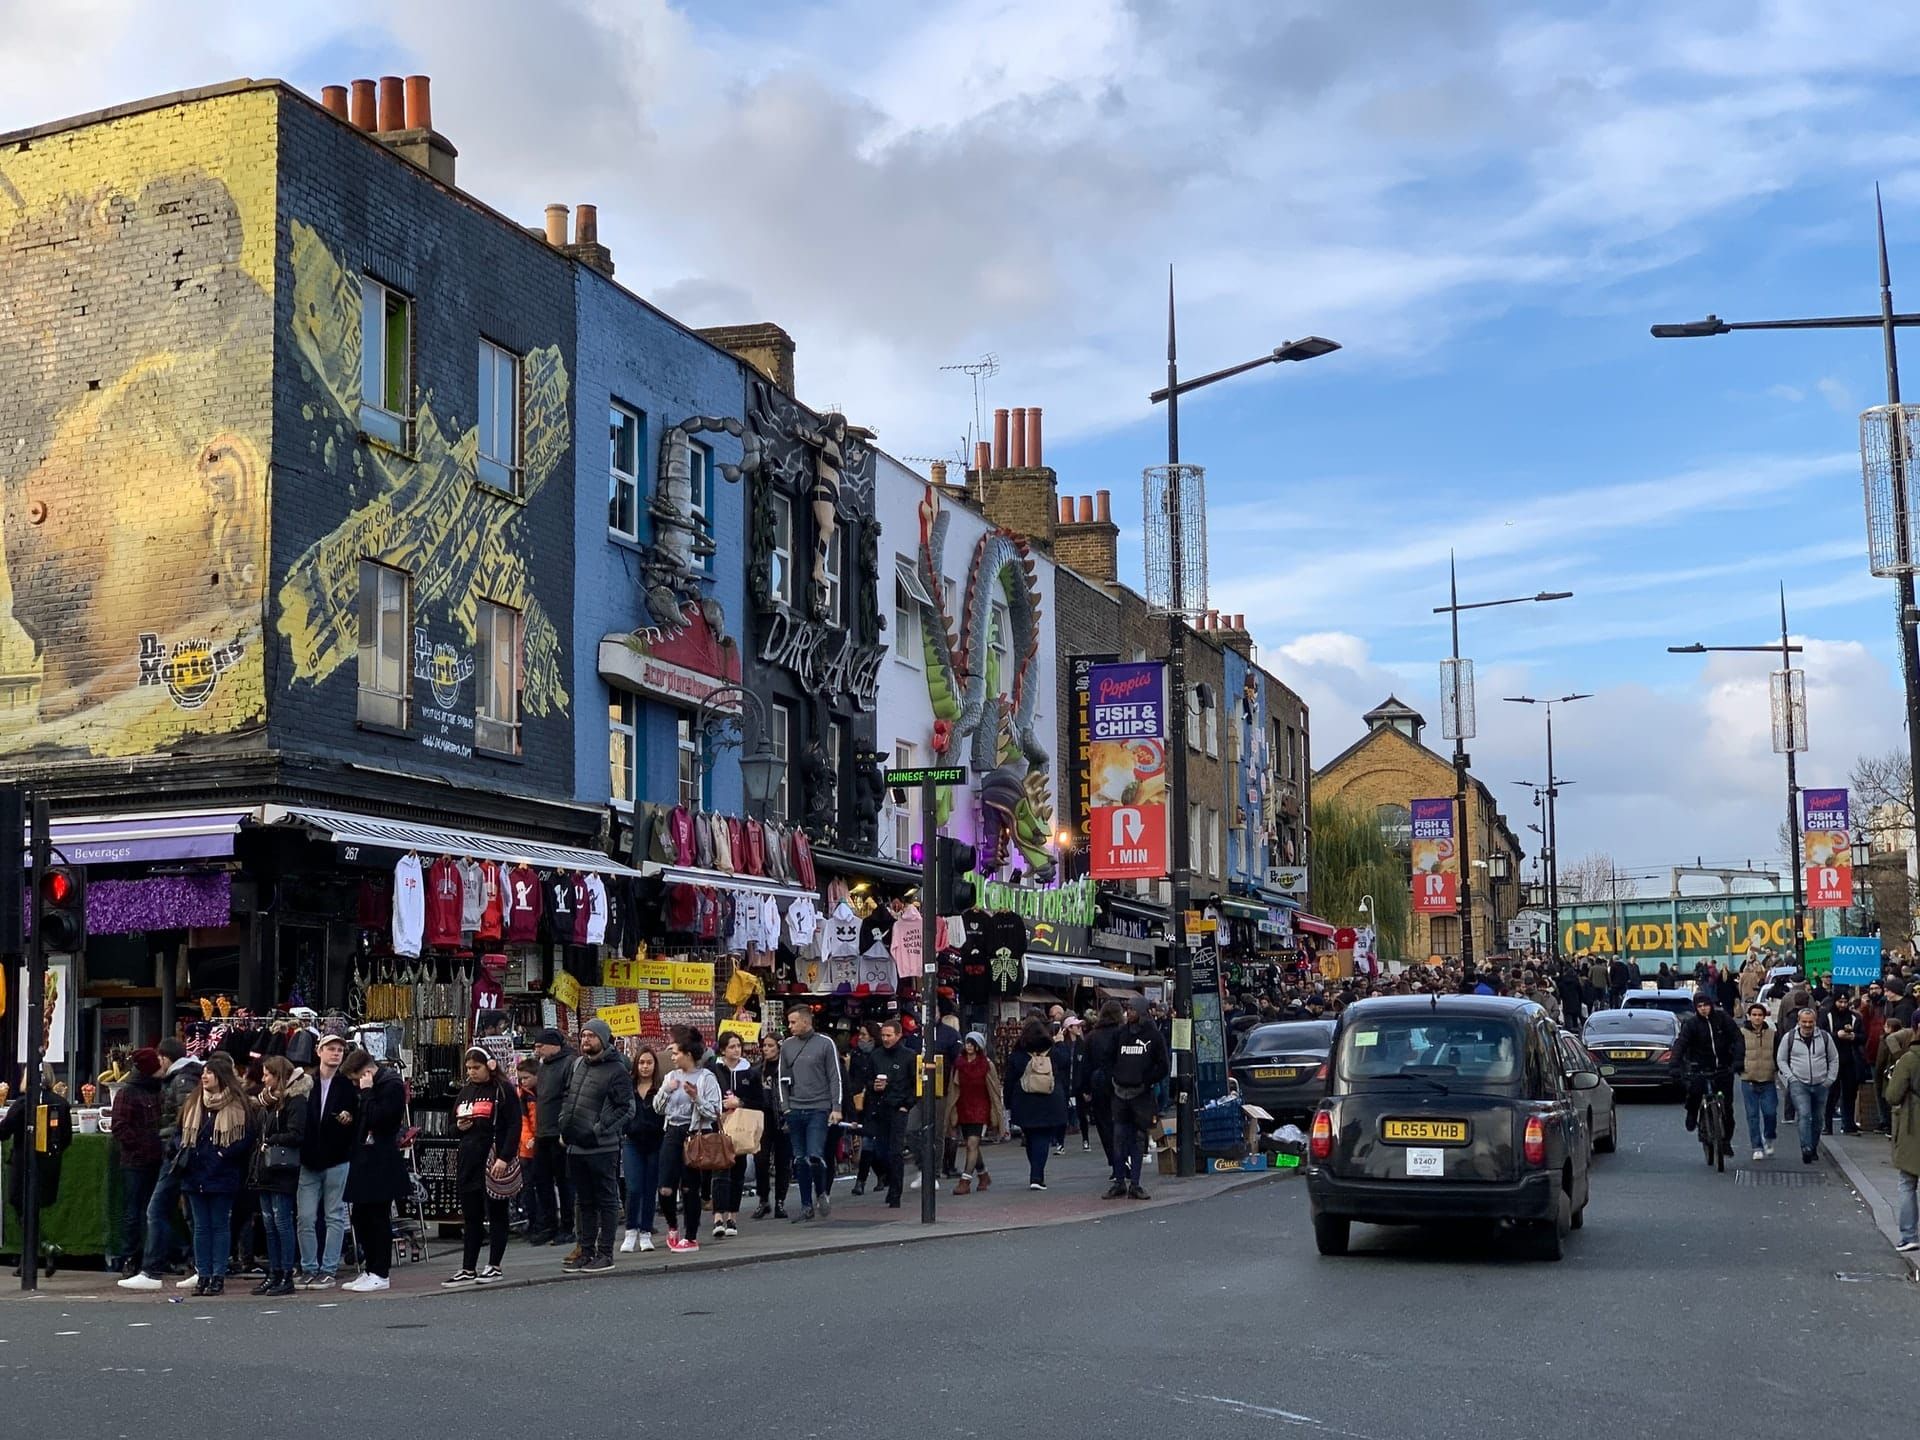 About Camden Town